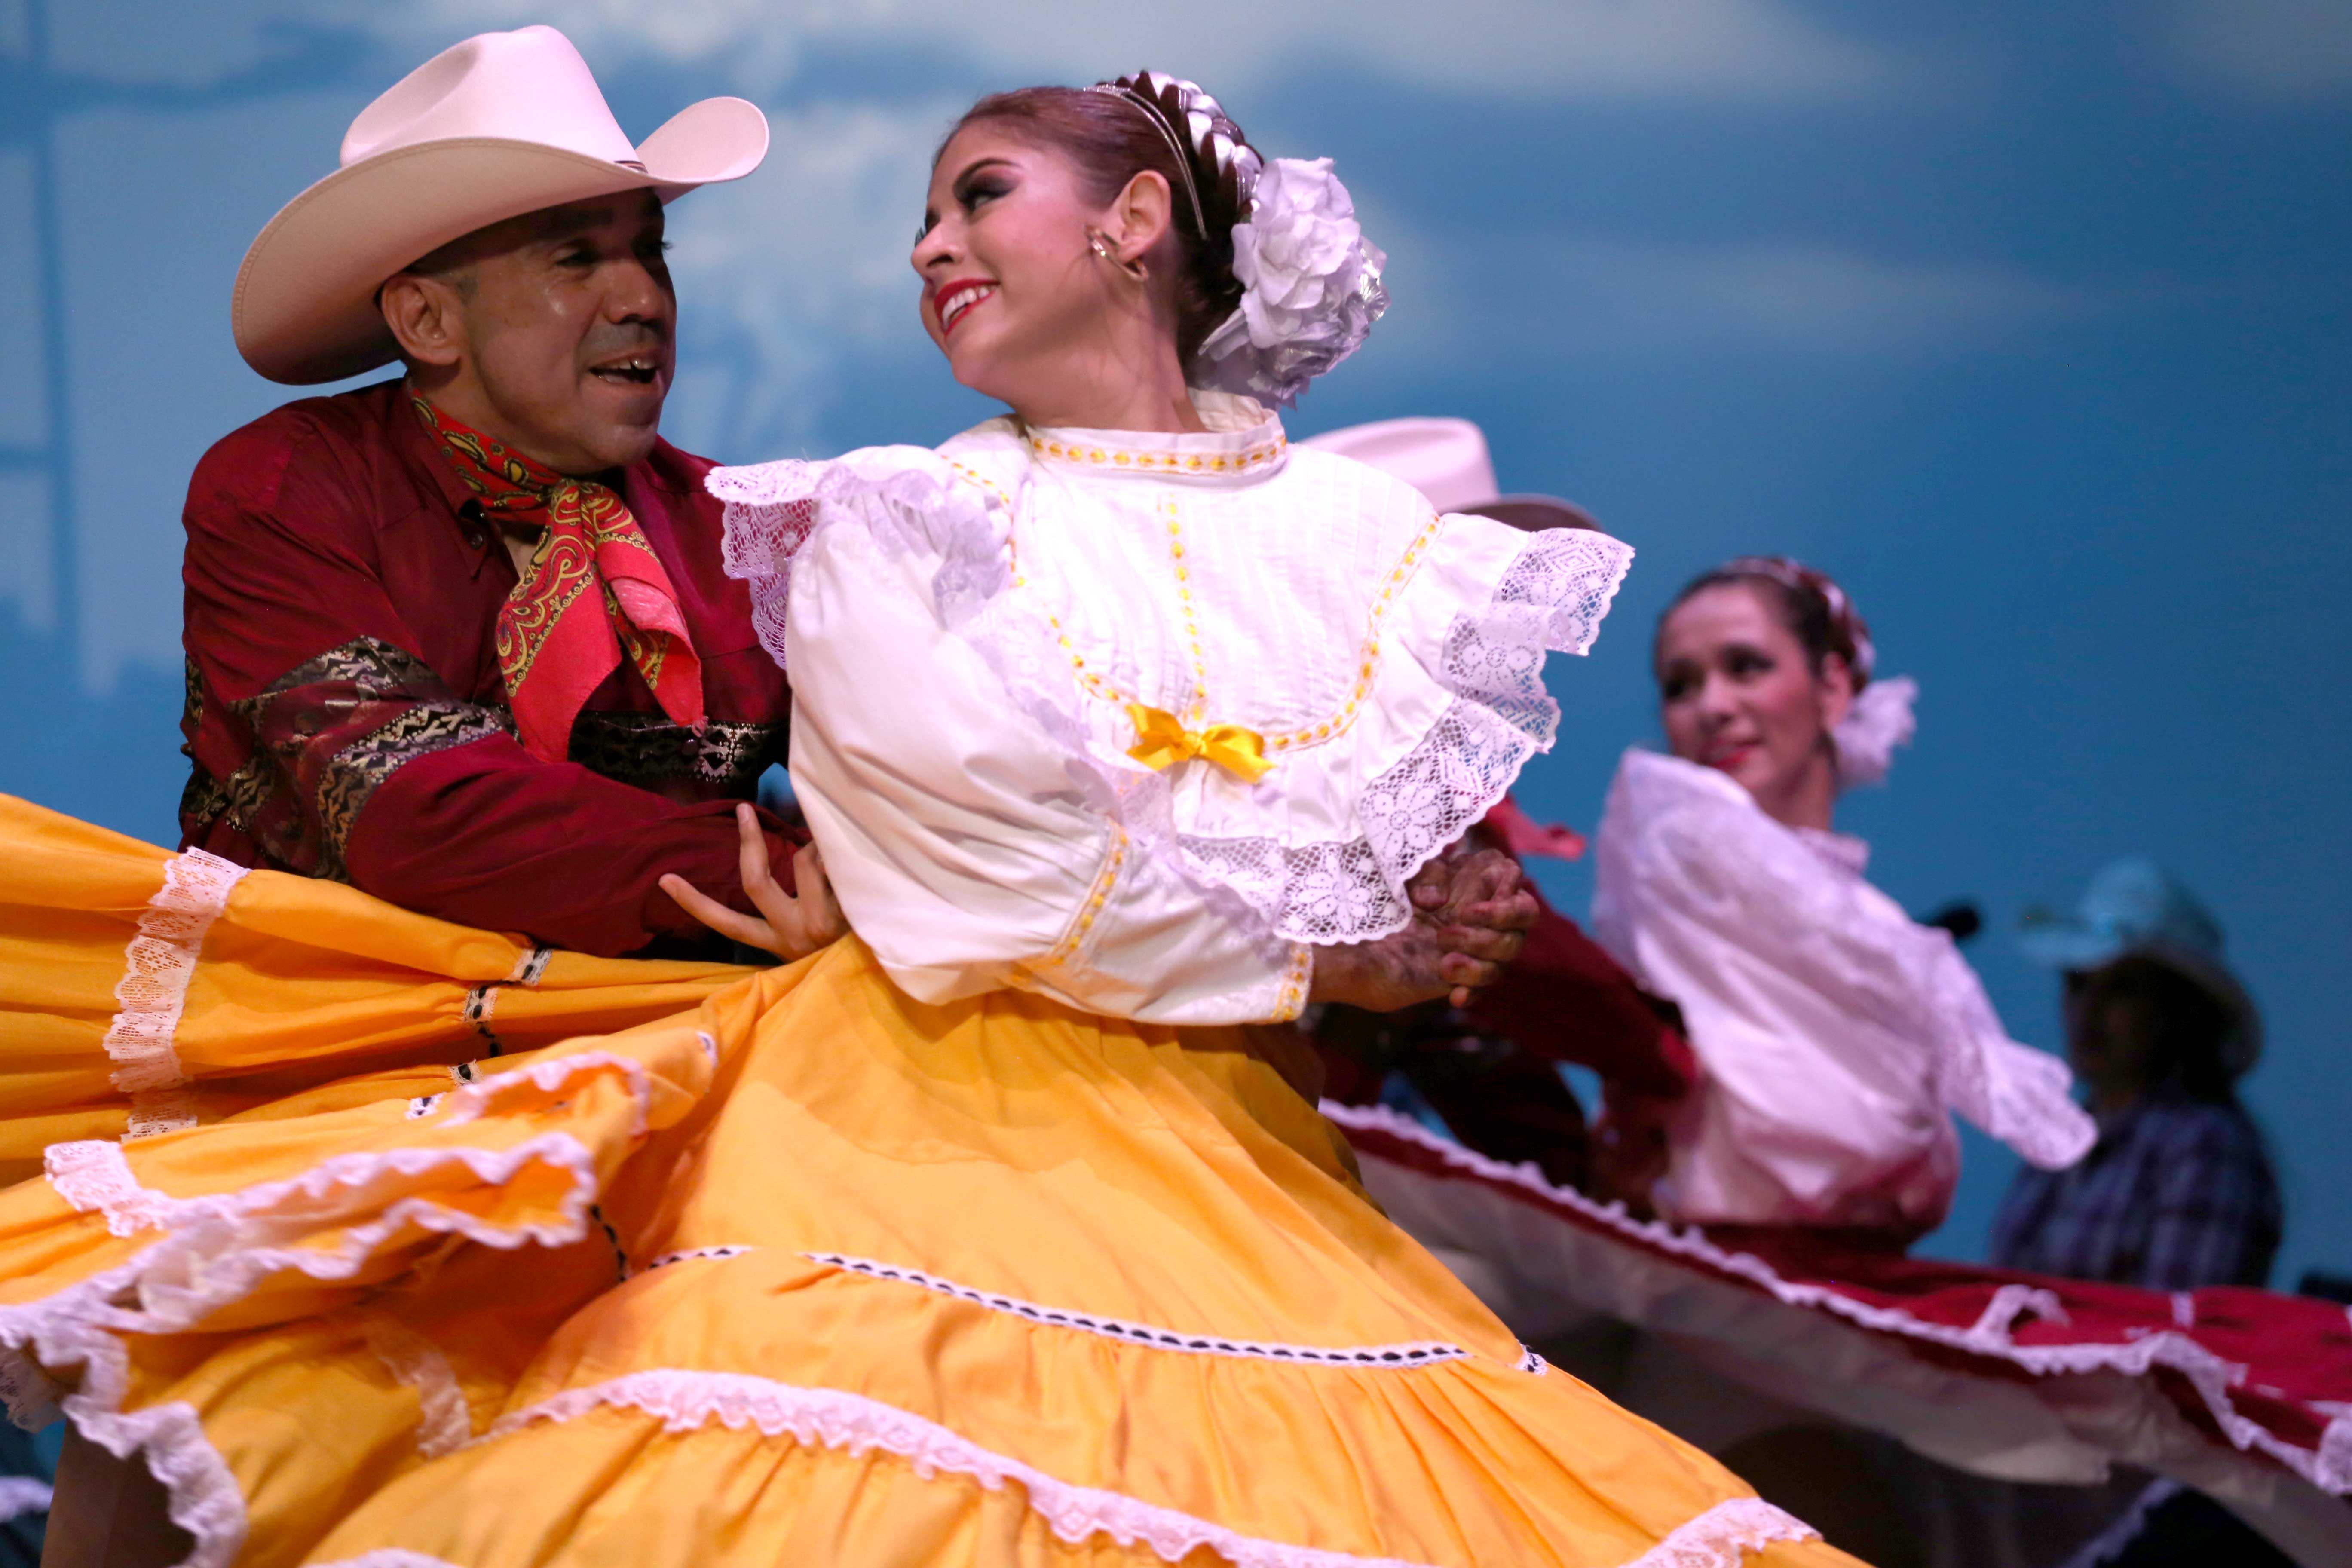 Mexican history and culture brought to life through dance and music ...